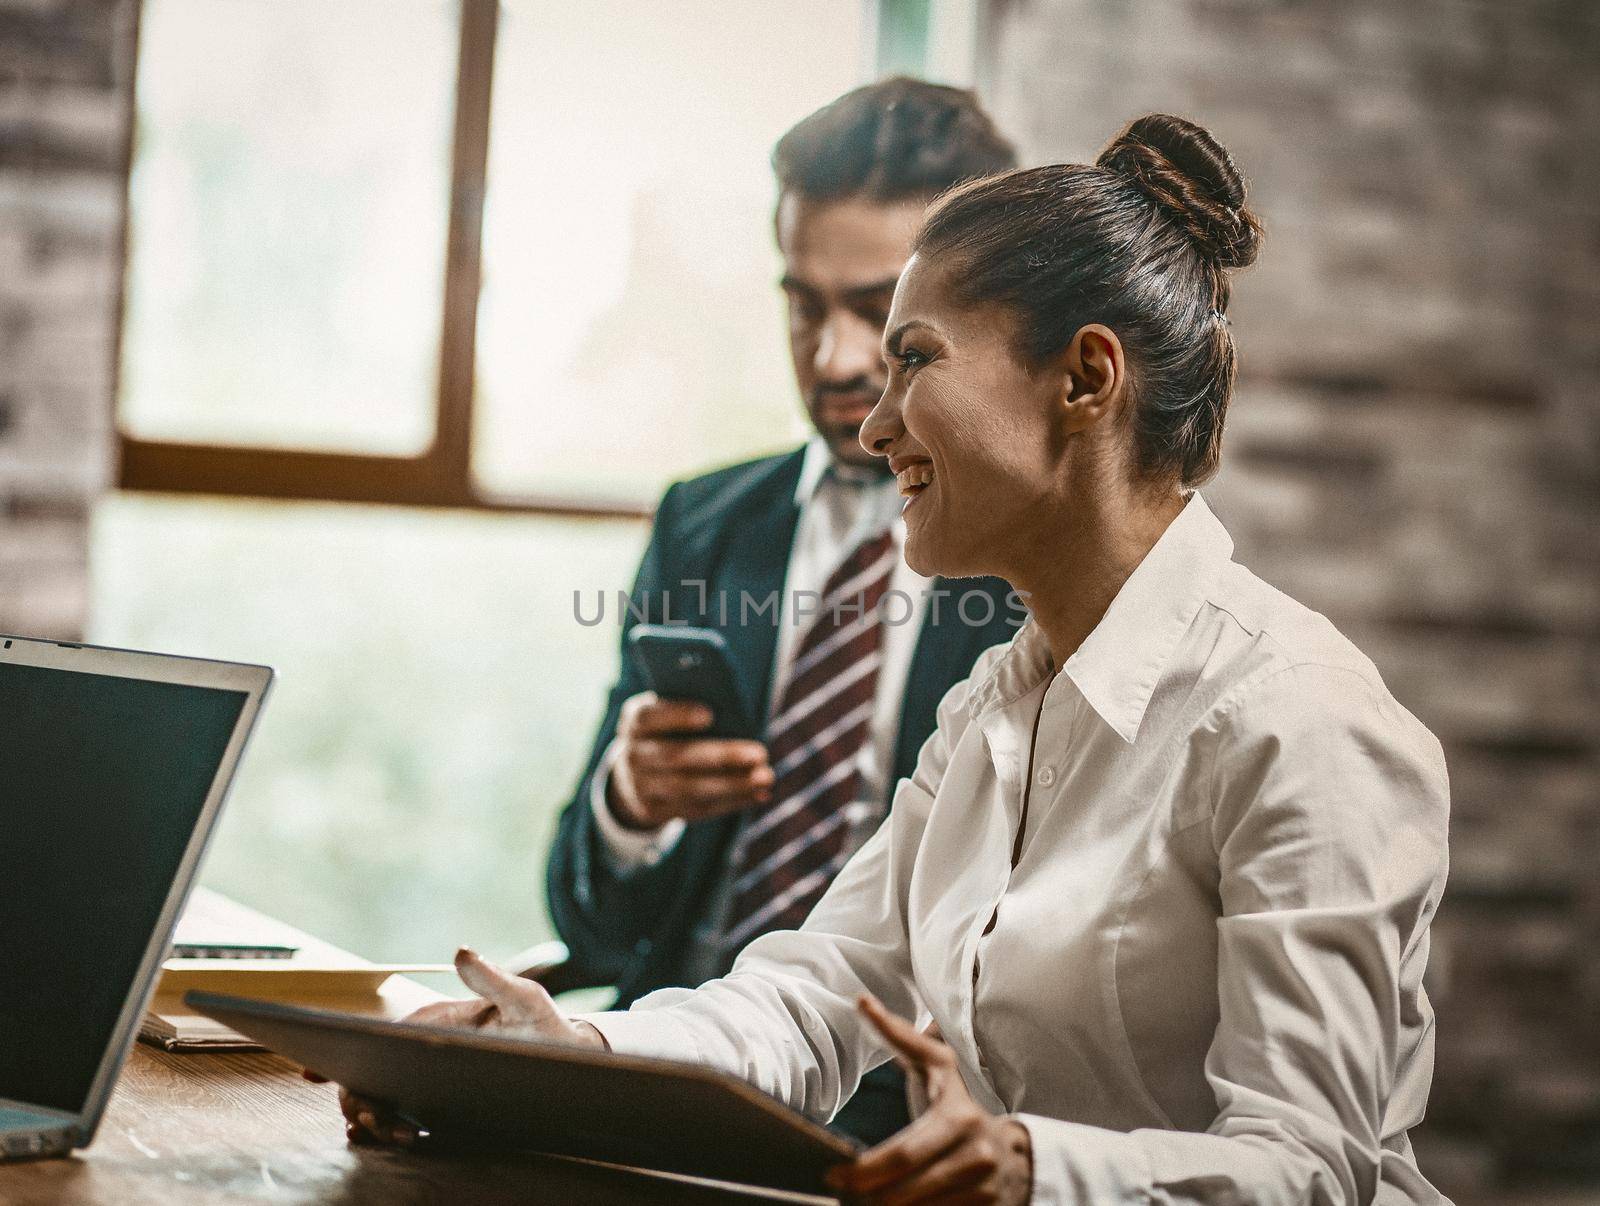 Smilling Businesswoman Holding Digital Tablet, Side View Of Charming Female Office Worker Toothy Smiling During Conversation With Her Coworkers At Business Meeting, Dutch Angle Shot, Toned Image